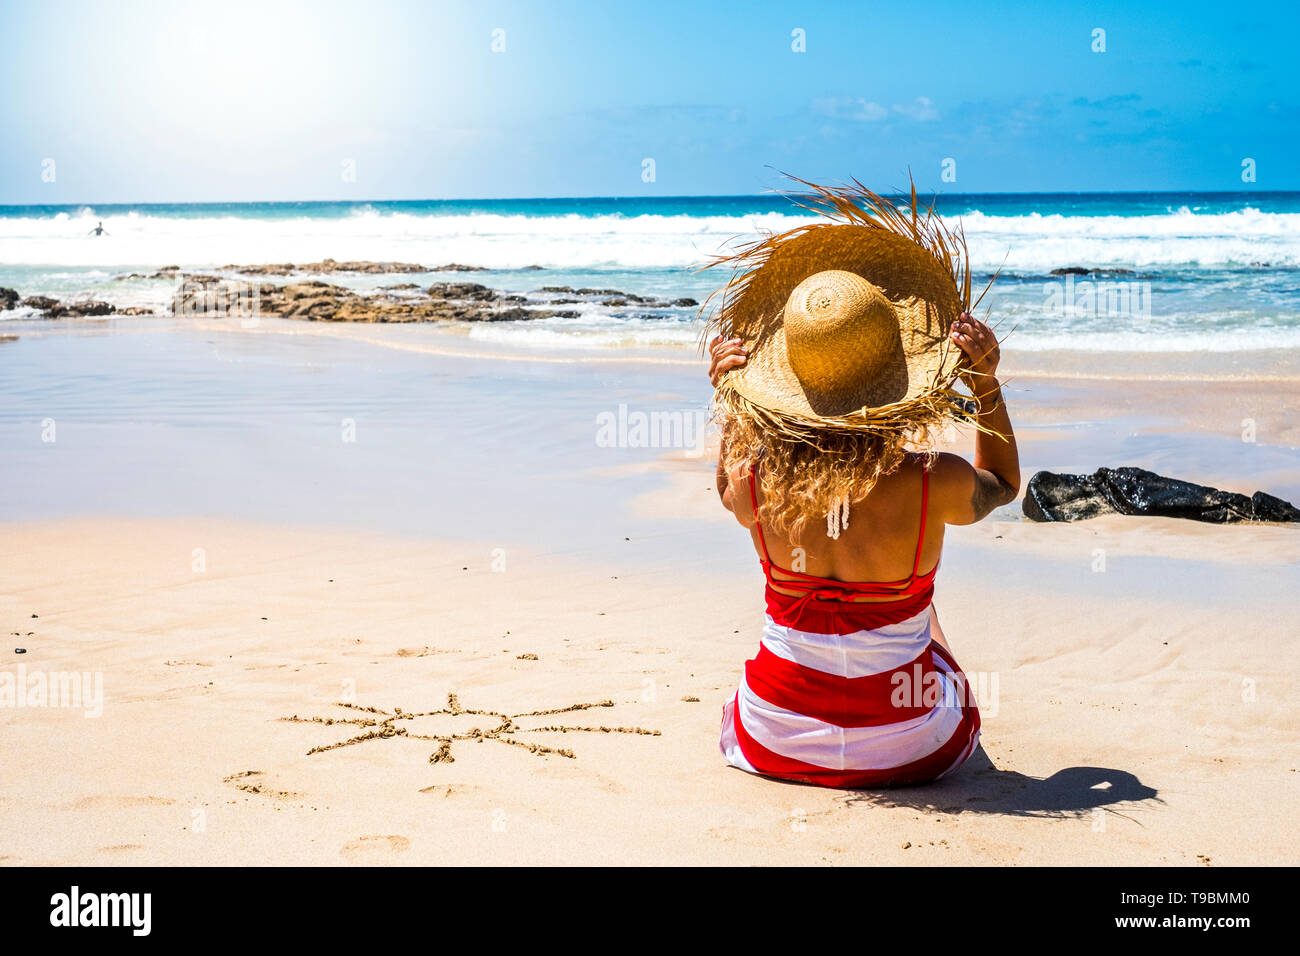 Summer holiday vacation at the beach in paradise beautiful resort people concept with nice woman with tourist hat viewed from back enjoying the sand a Stock Photo